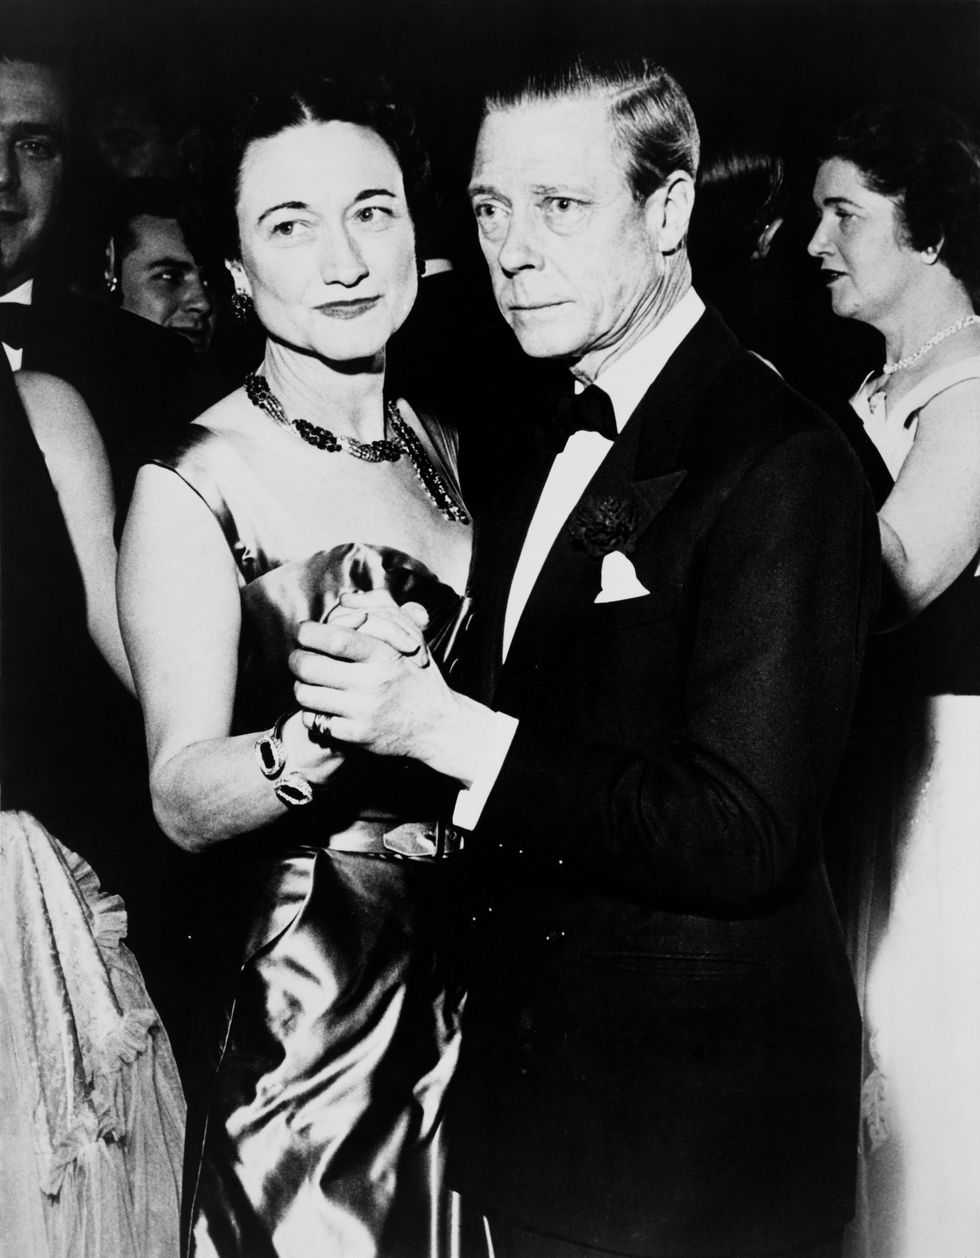 mandatory credit photo by everettshutterstock 10289774a
the duke and duchess of windsor at the assembly ball in the hotel sherry netherland 1950
historical collection